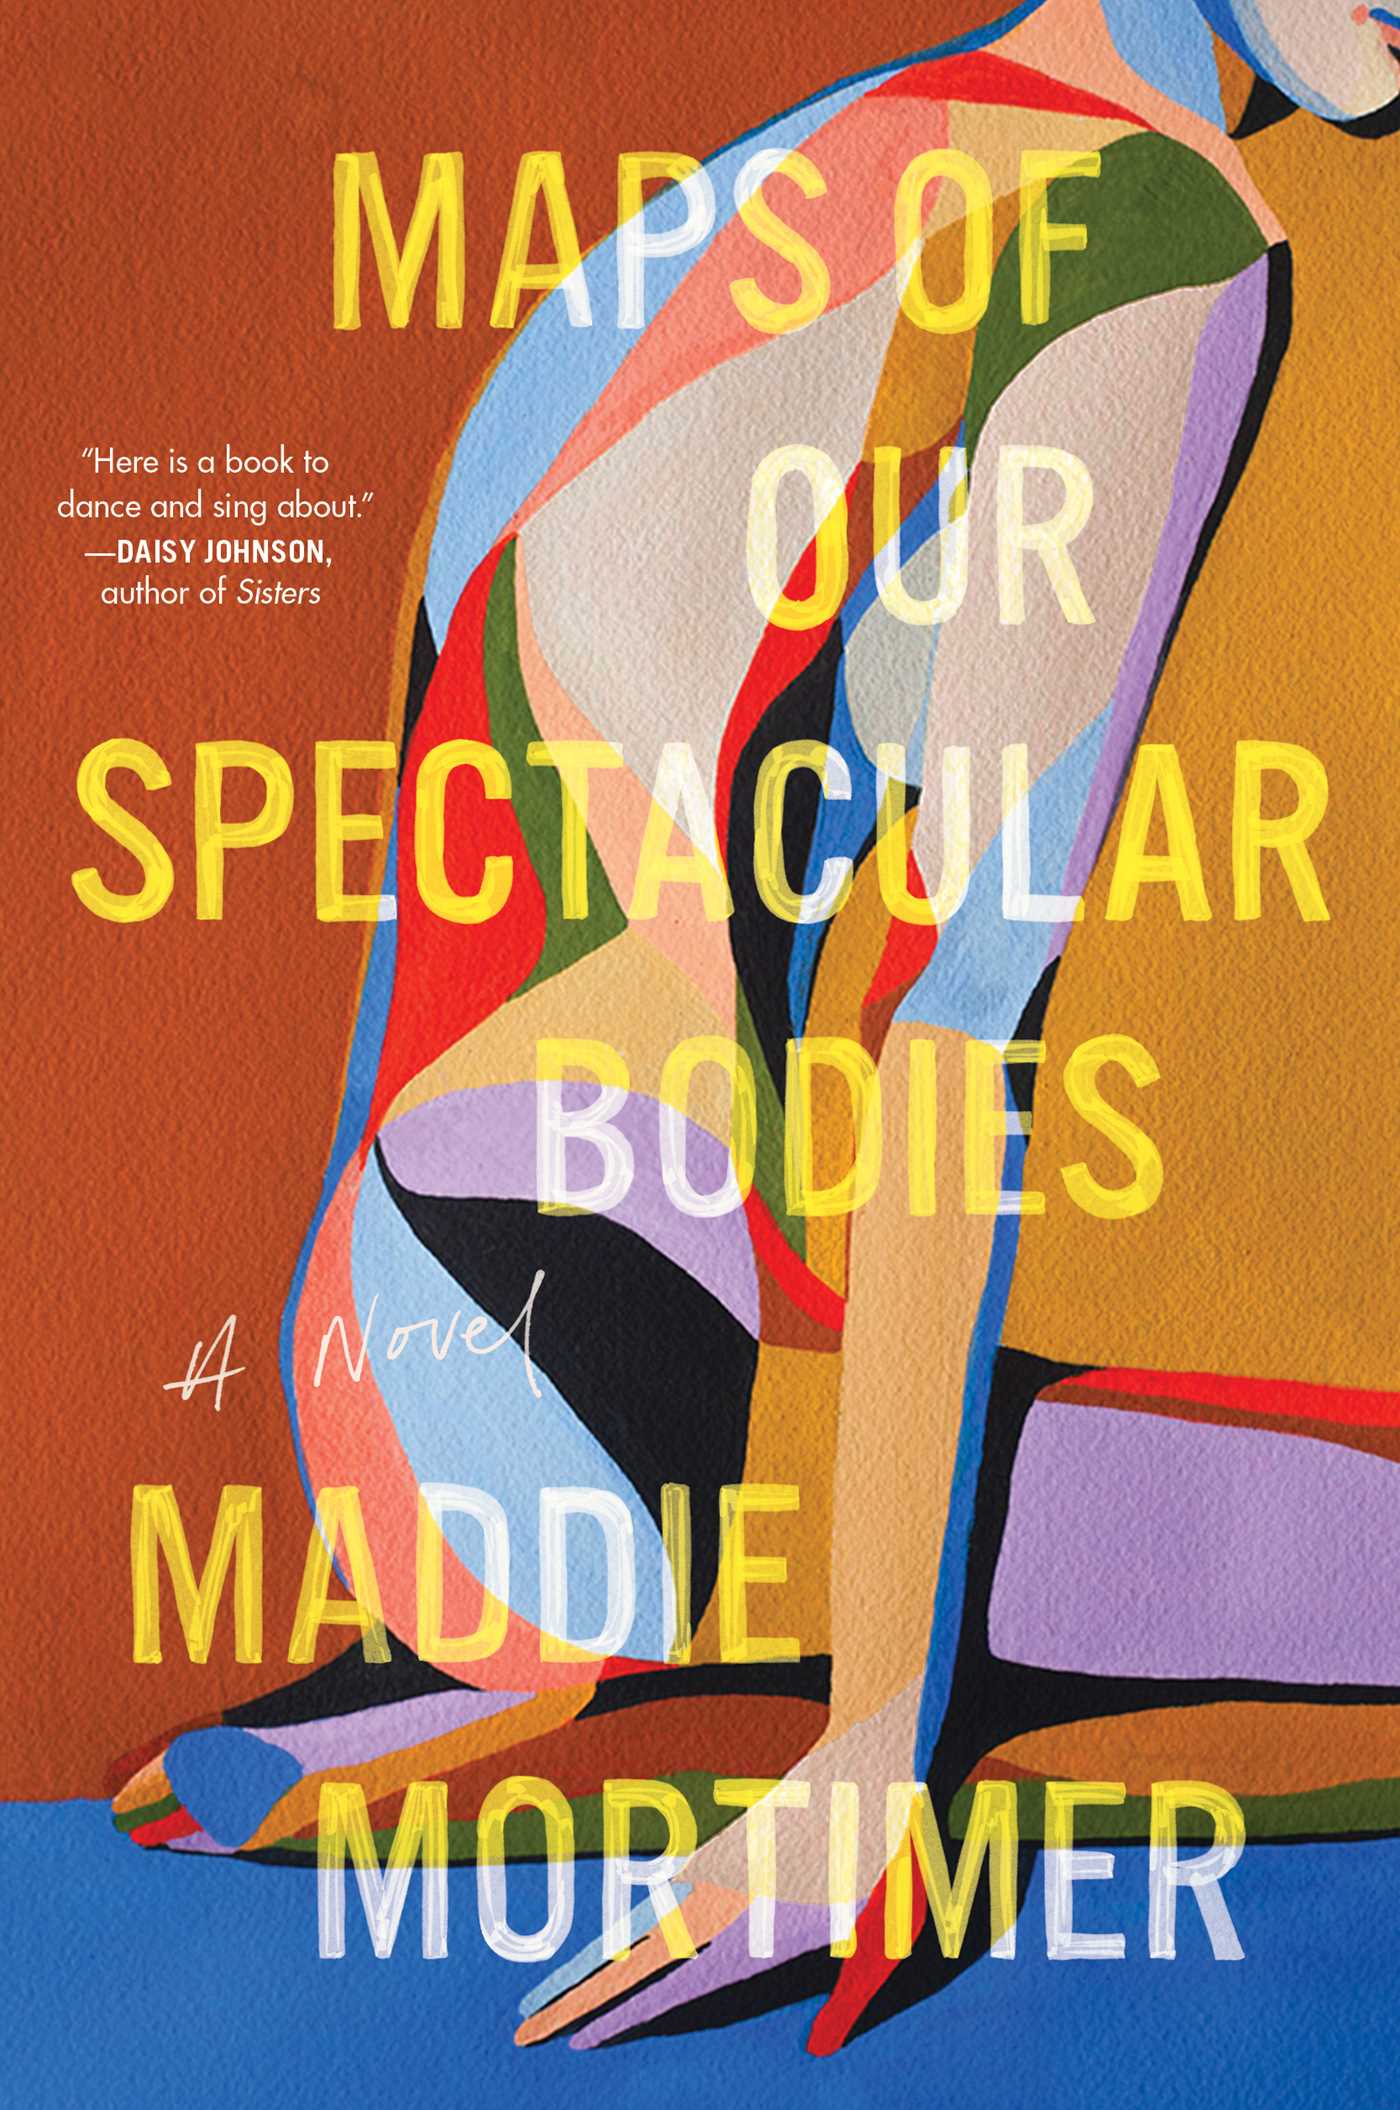 Maps of Our Spectacular Bodies | Mortimer, Maddie